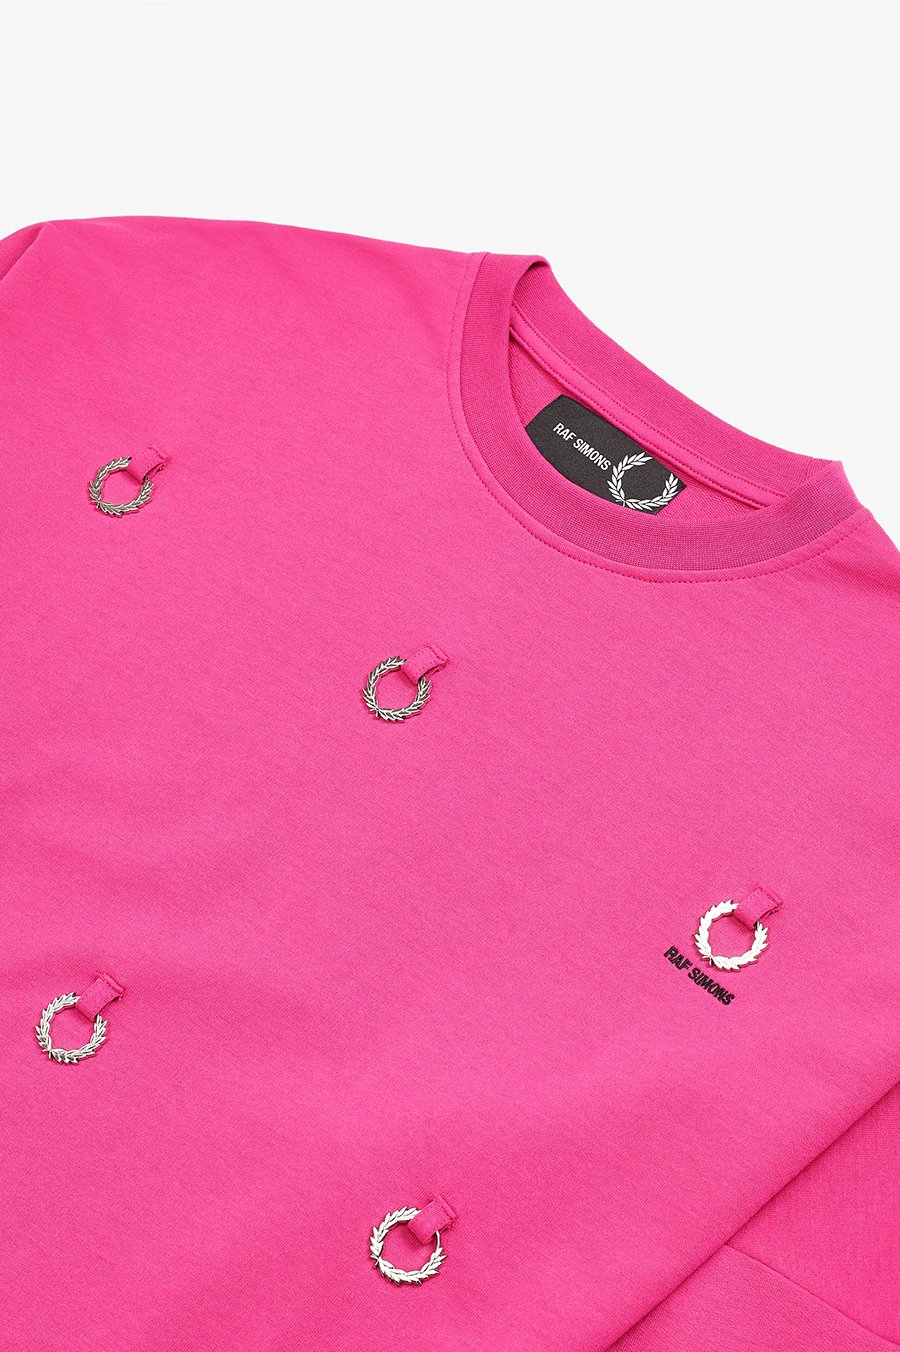 Fred Perry x Raf Simons Automne-Hiver 2019